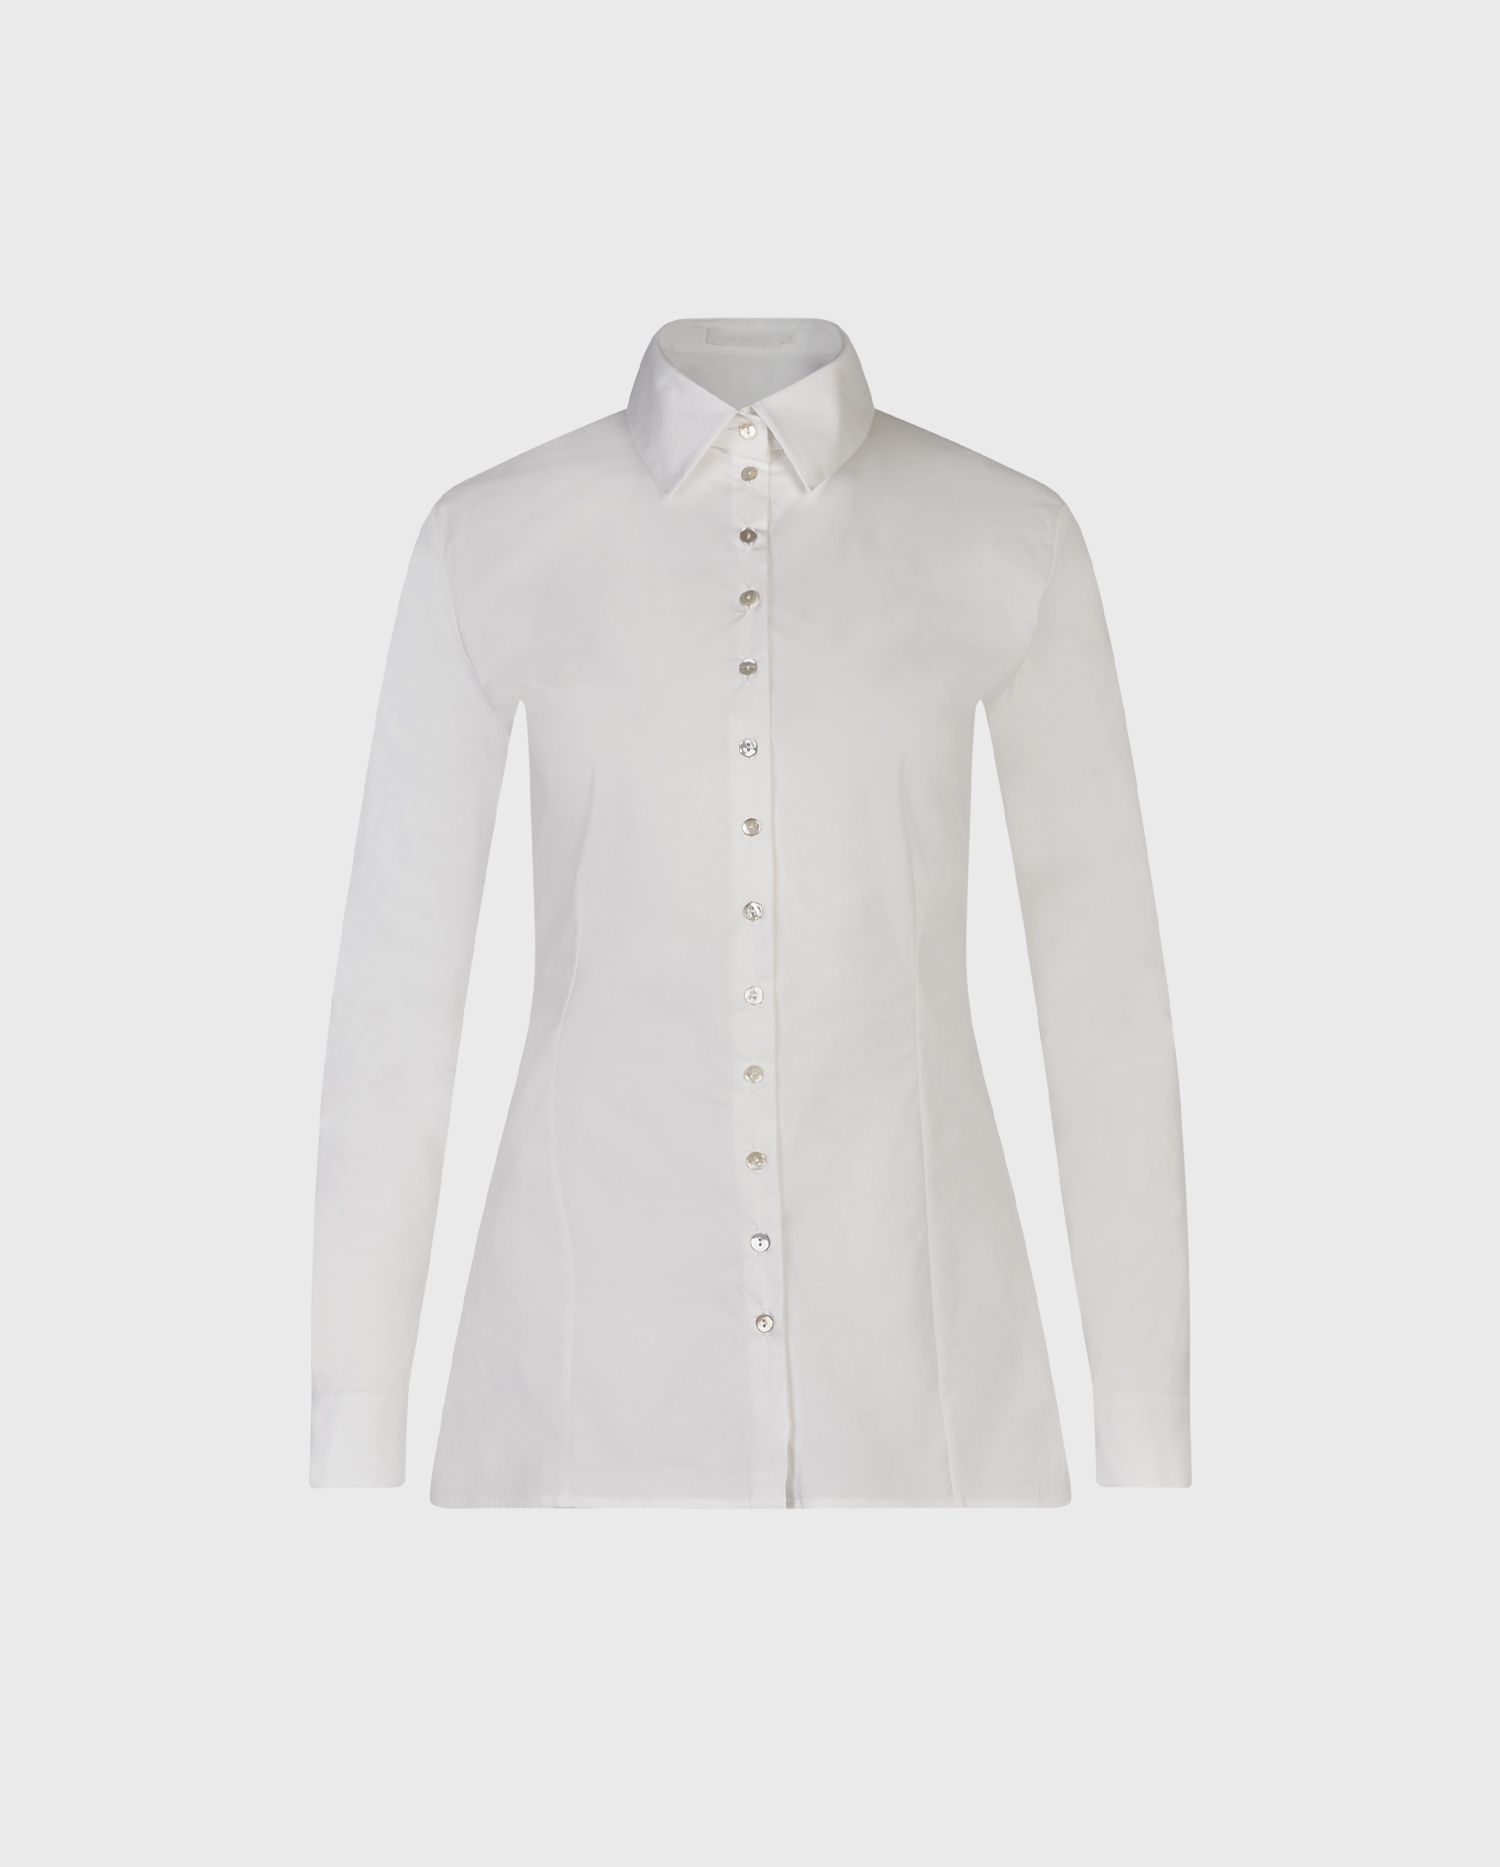 Discover the LARRYTON White Long Sleeve Poplin Shirt from ANNE FONTAINE